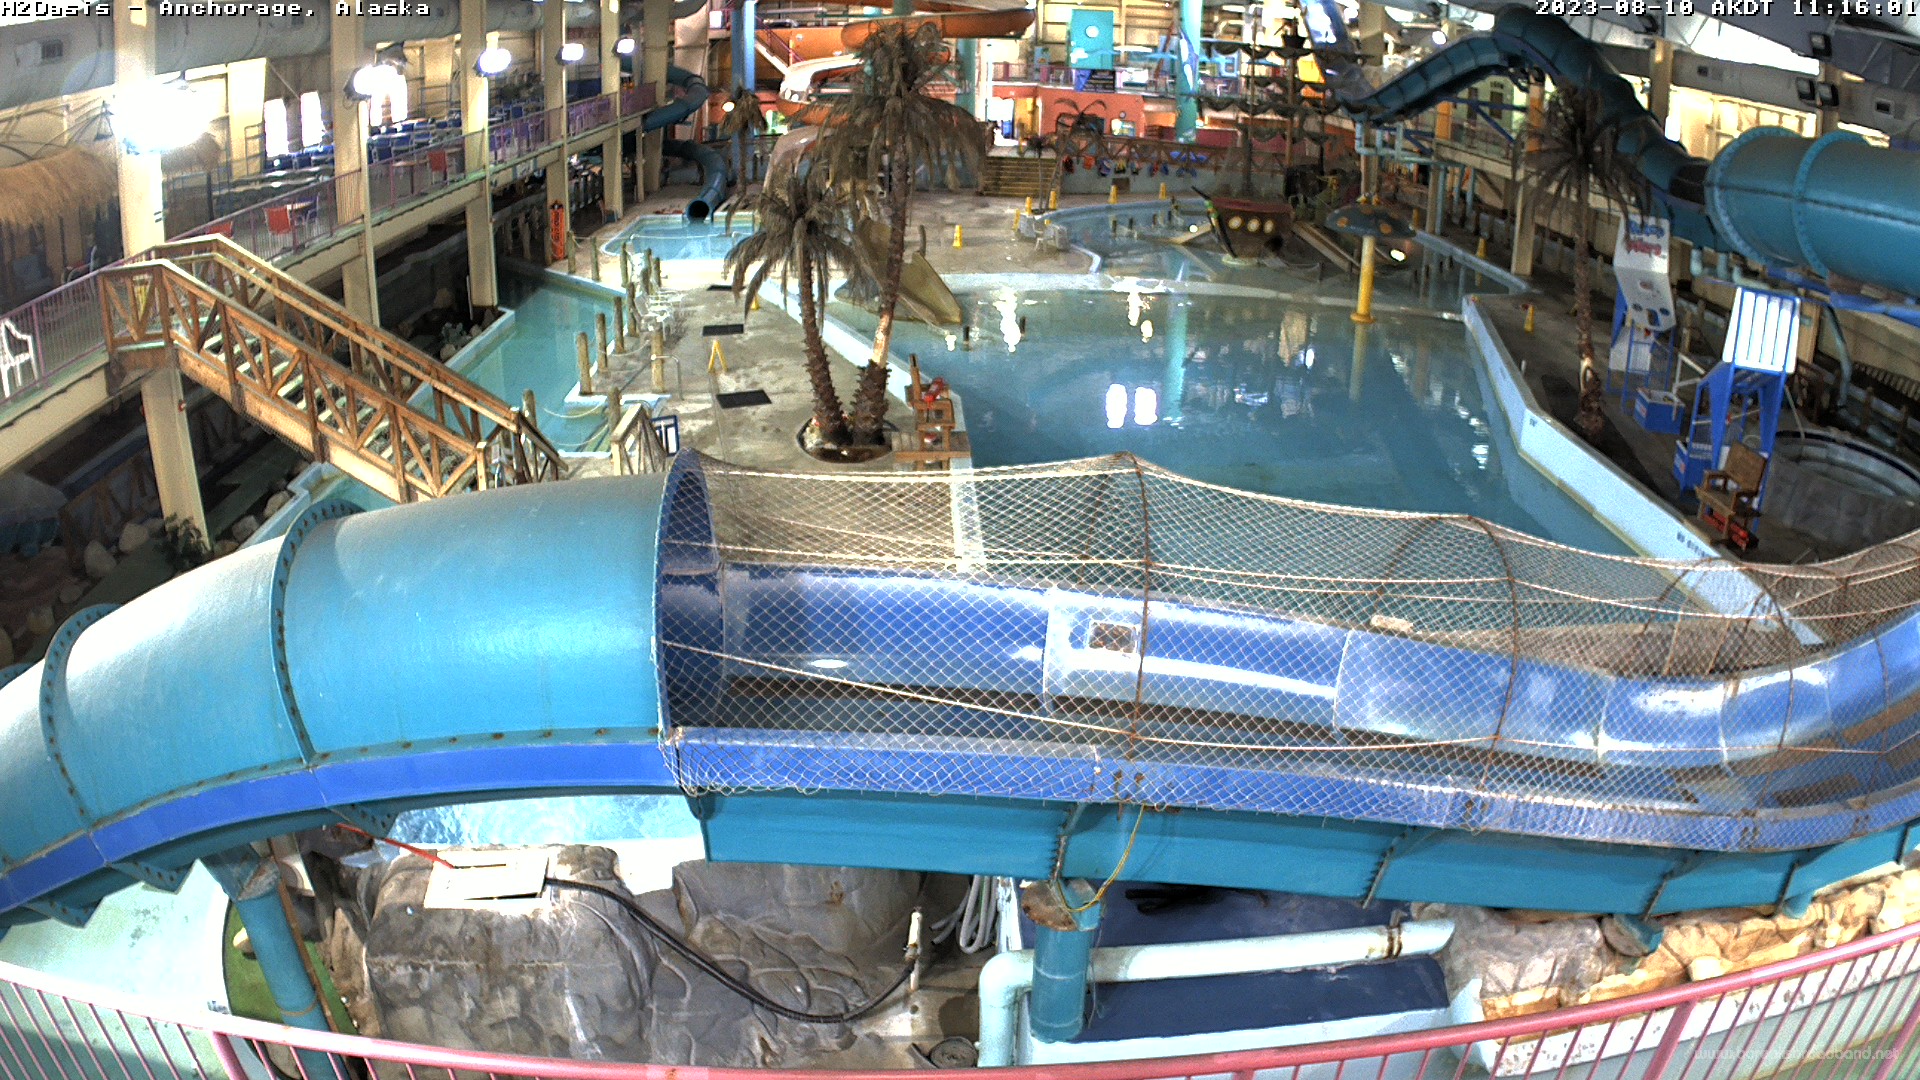 Camera image of Alaska's H2 Oasis
Anchorage’s Only Indoor Water Park.